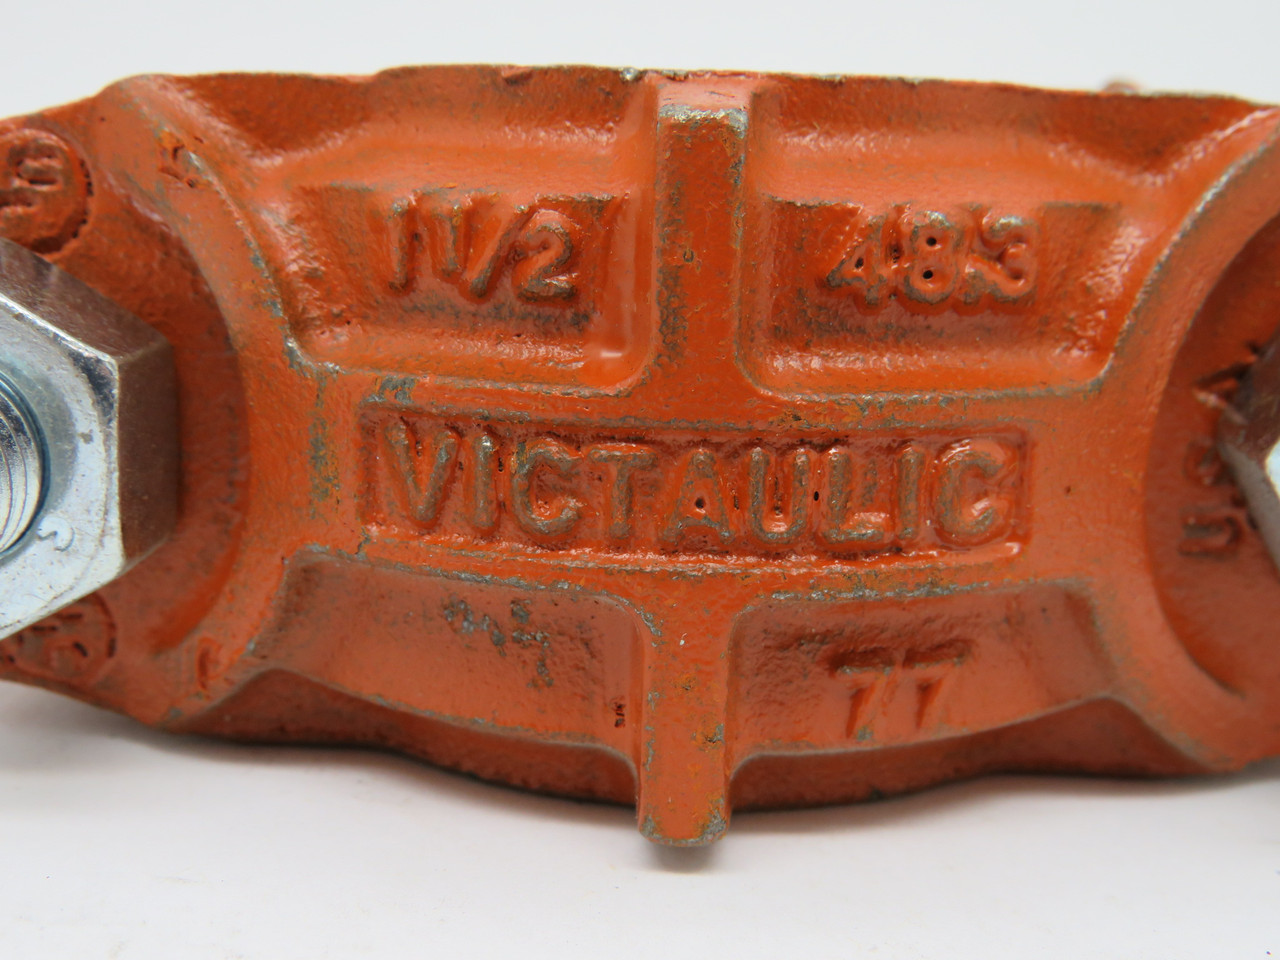 Victaulic 77-1-1/2 DN40 Flexible Coupling 1-1/2" USED